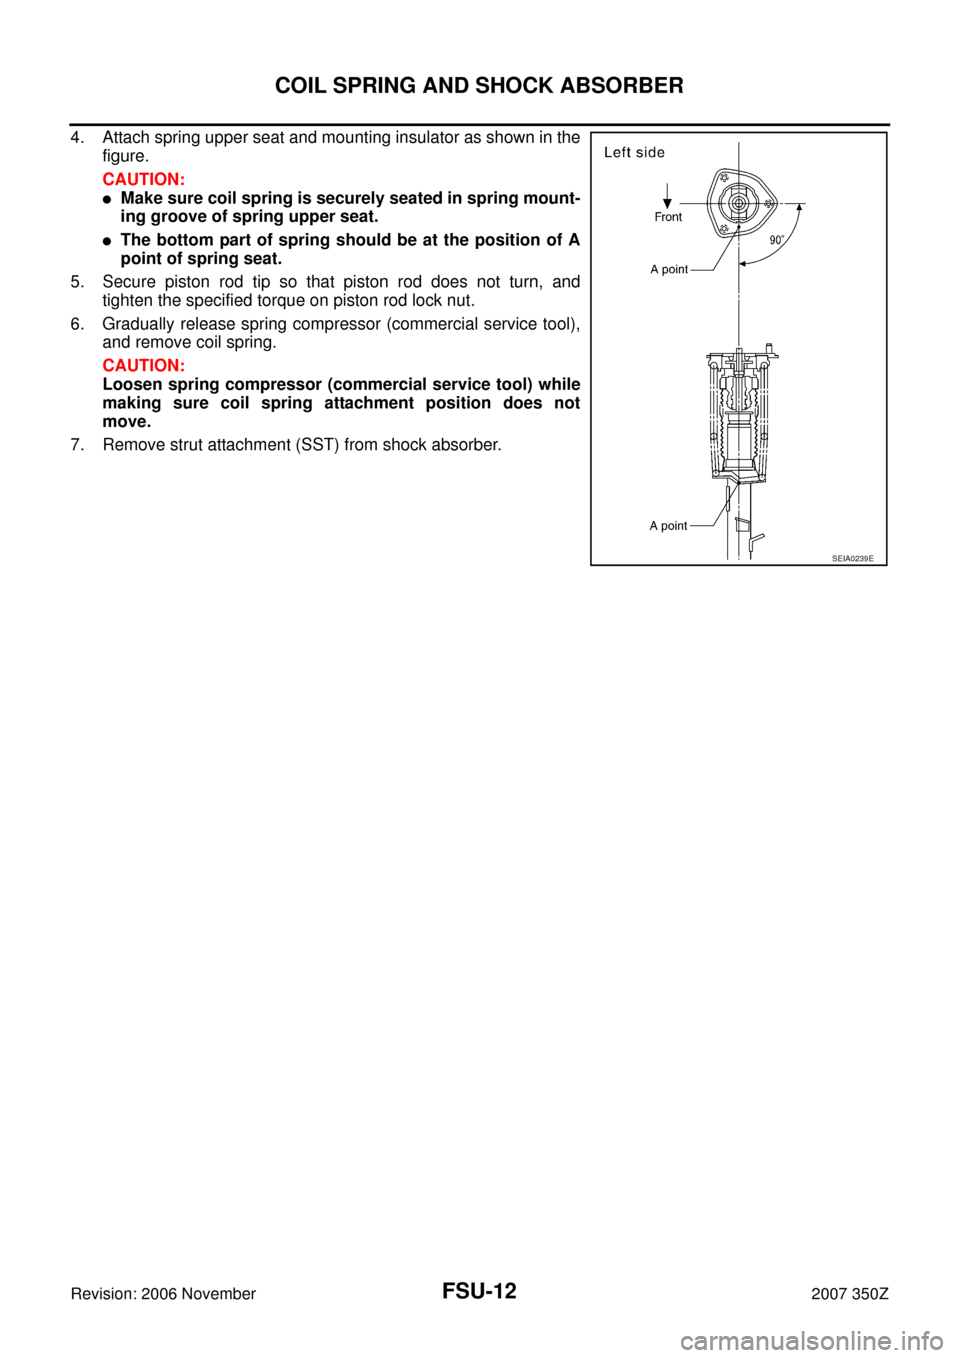 NISSAN 350Z 2007 Z33 Front Suspension User Guide FSU-12
COIL SPRING AND SHOCK ABSORBER
Revision: 2006 November2007 350Z
4. Attach spring upper seat and mounting insulator as shown in the
figure.
CAUTION:
Make sure coil spring is securely seated in 